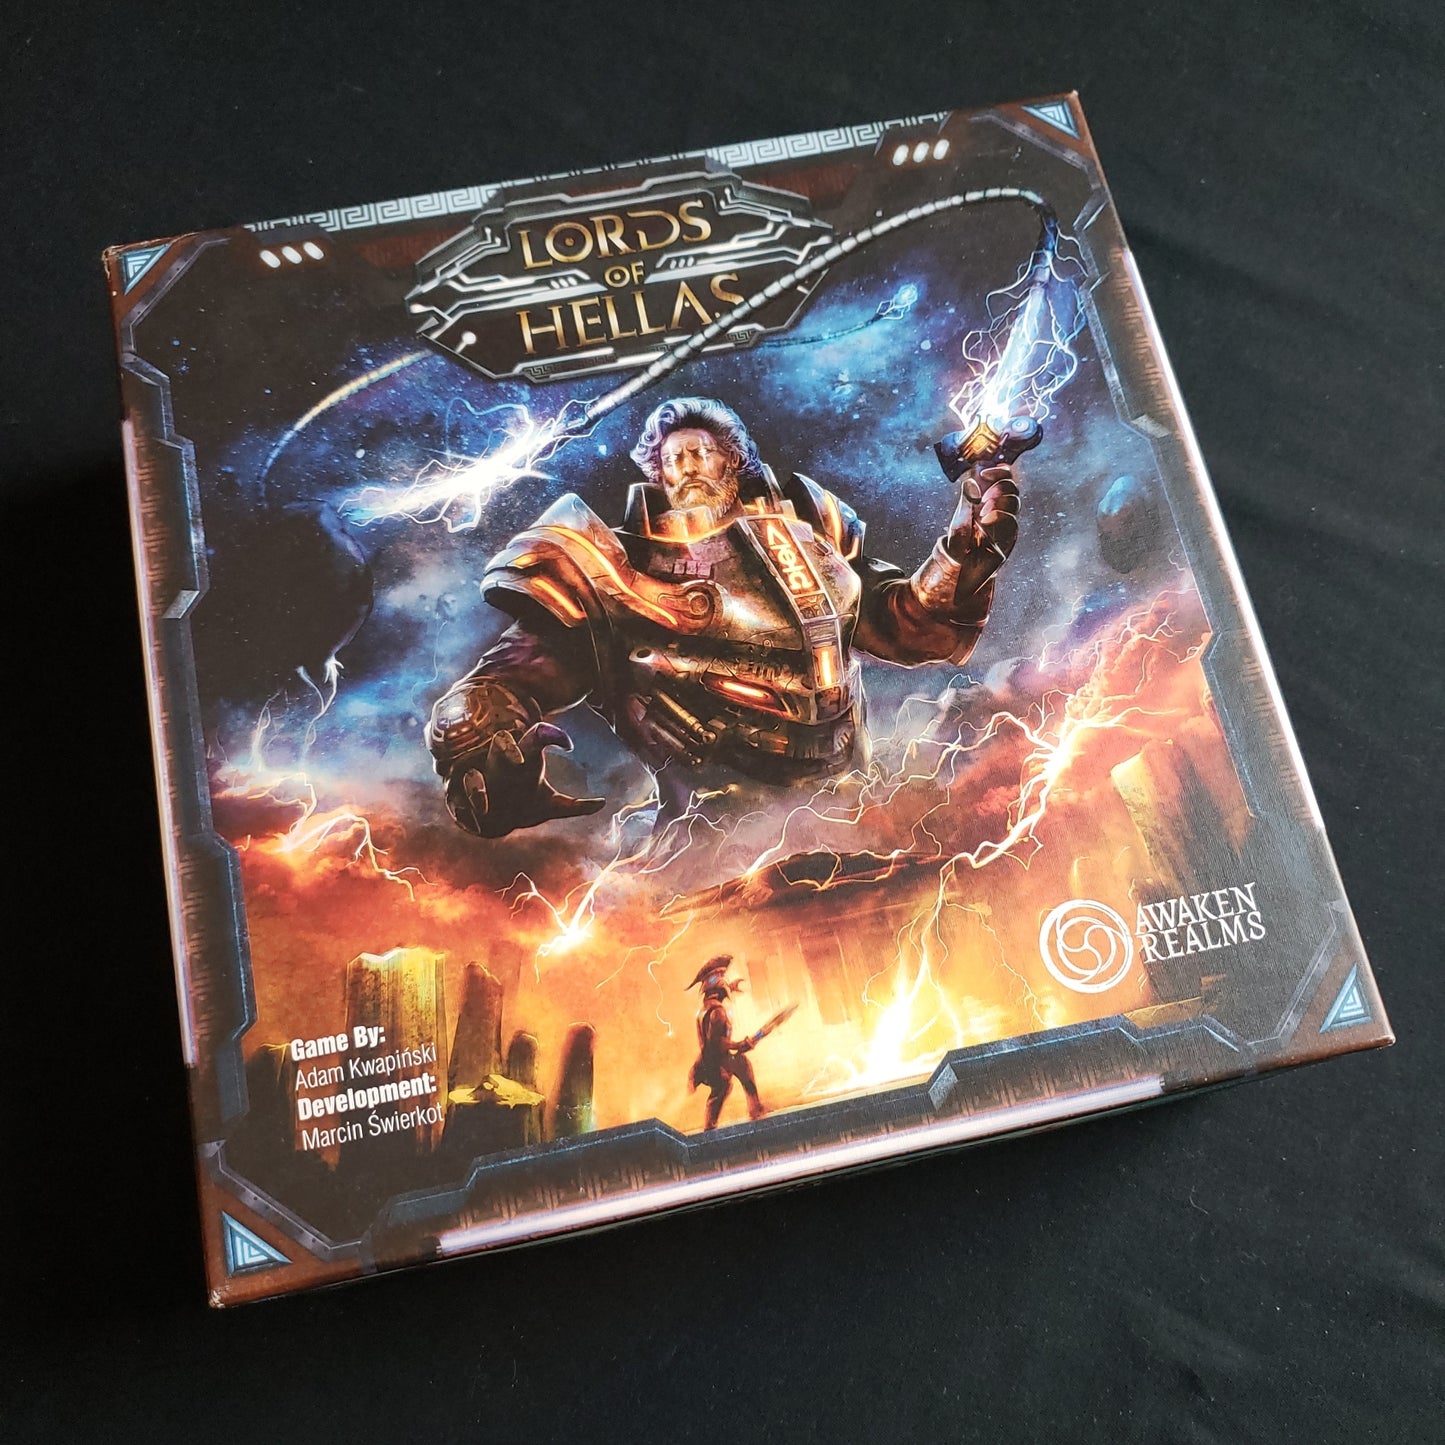 Image shows the front cover of the box of the Lords of Hellas board game